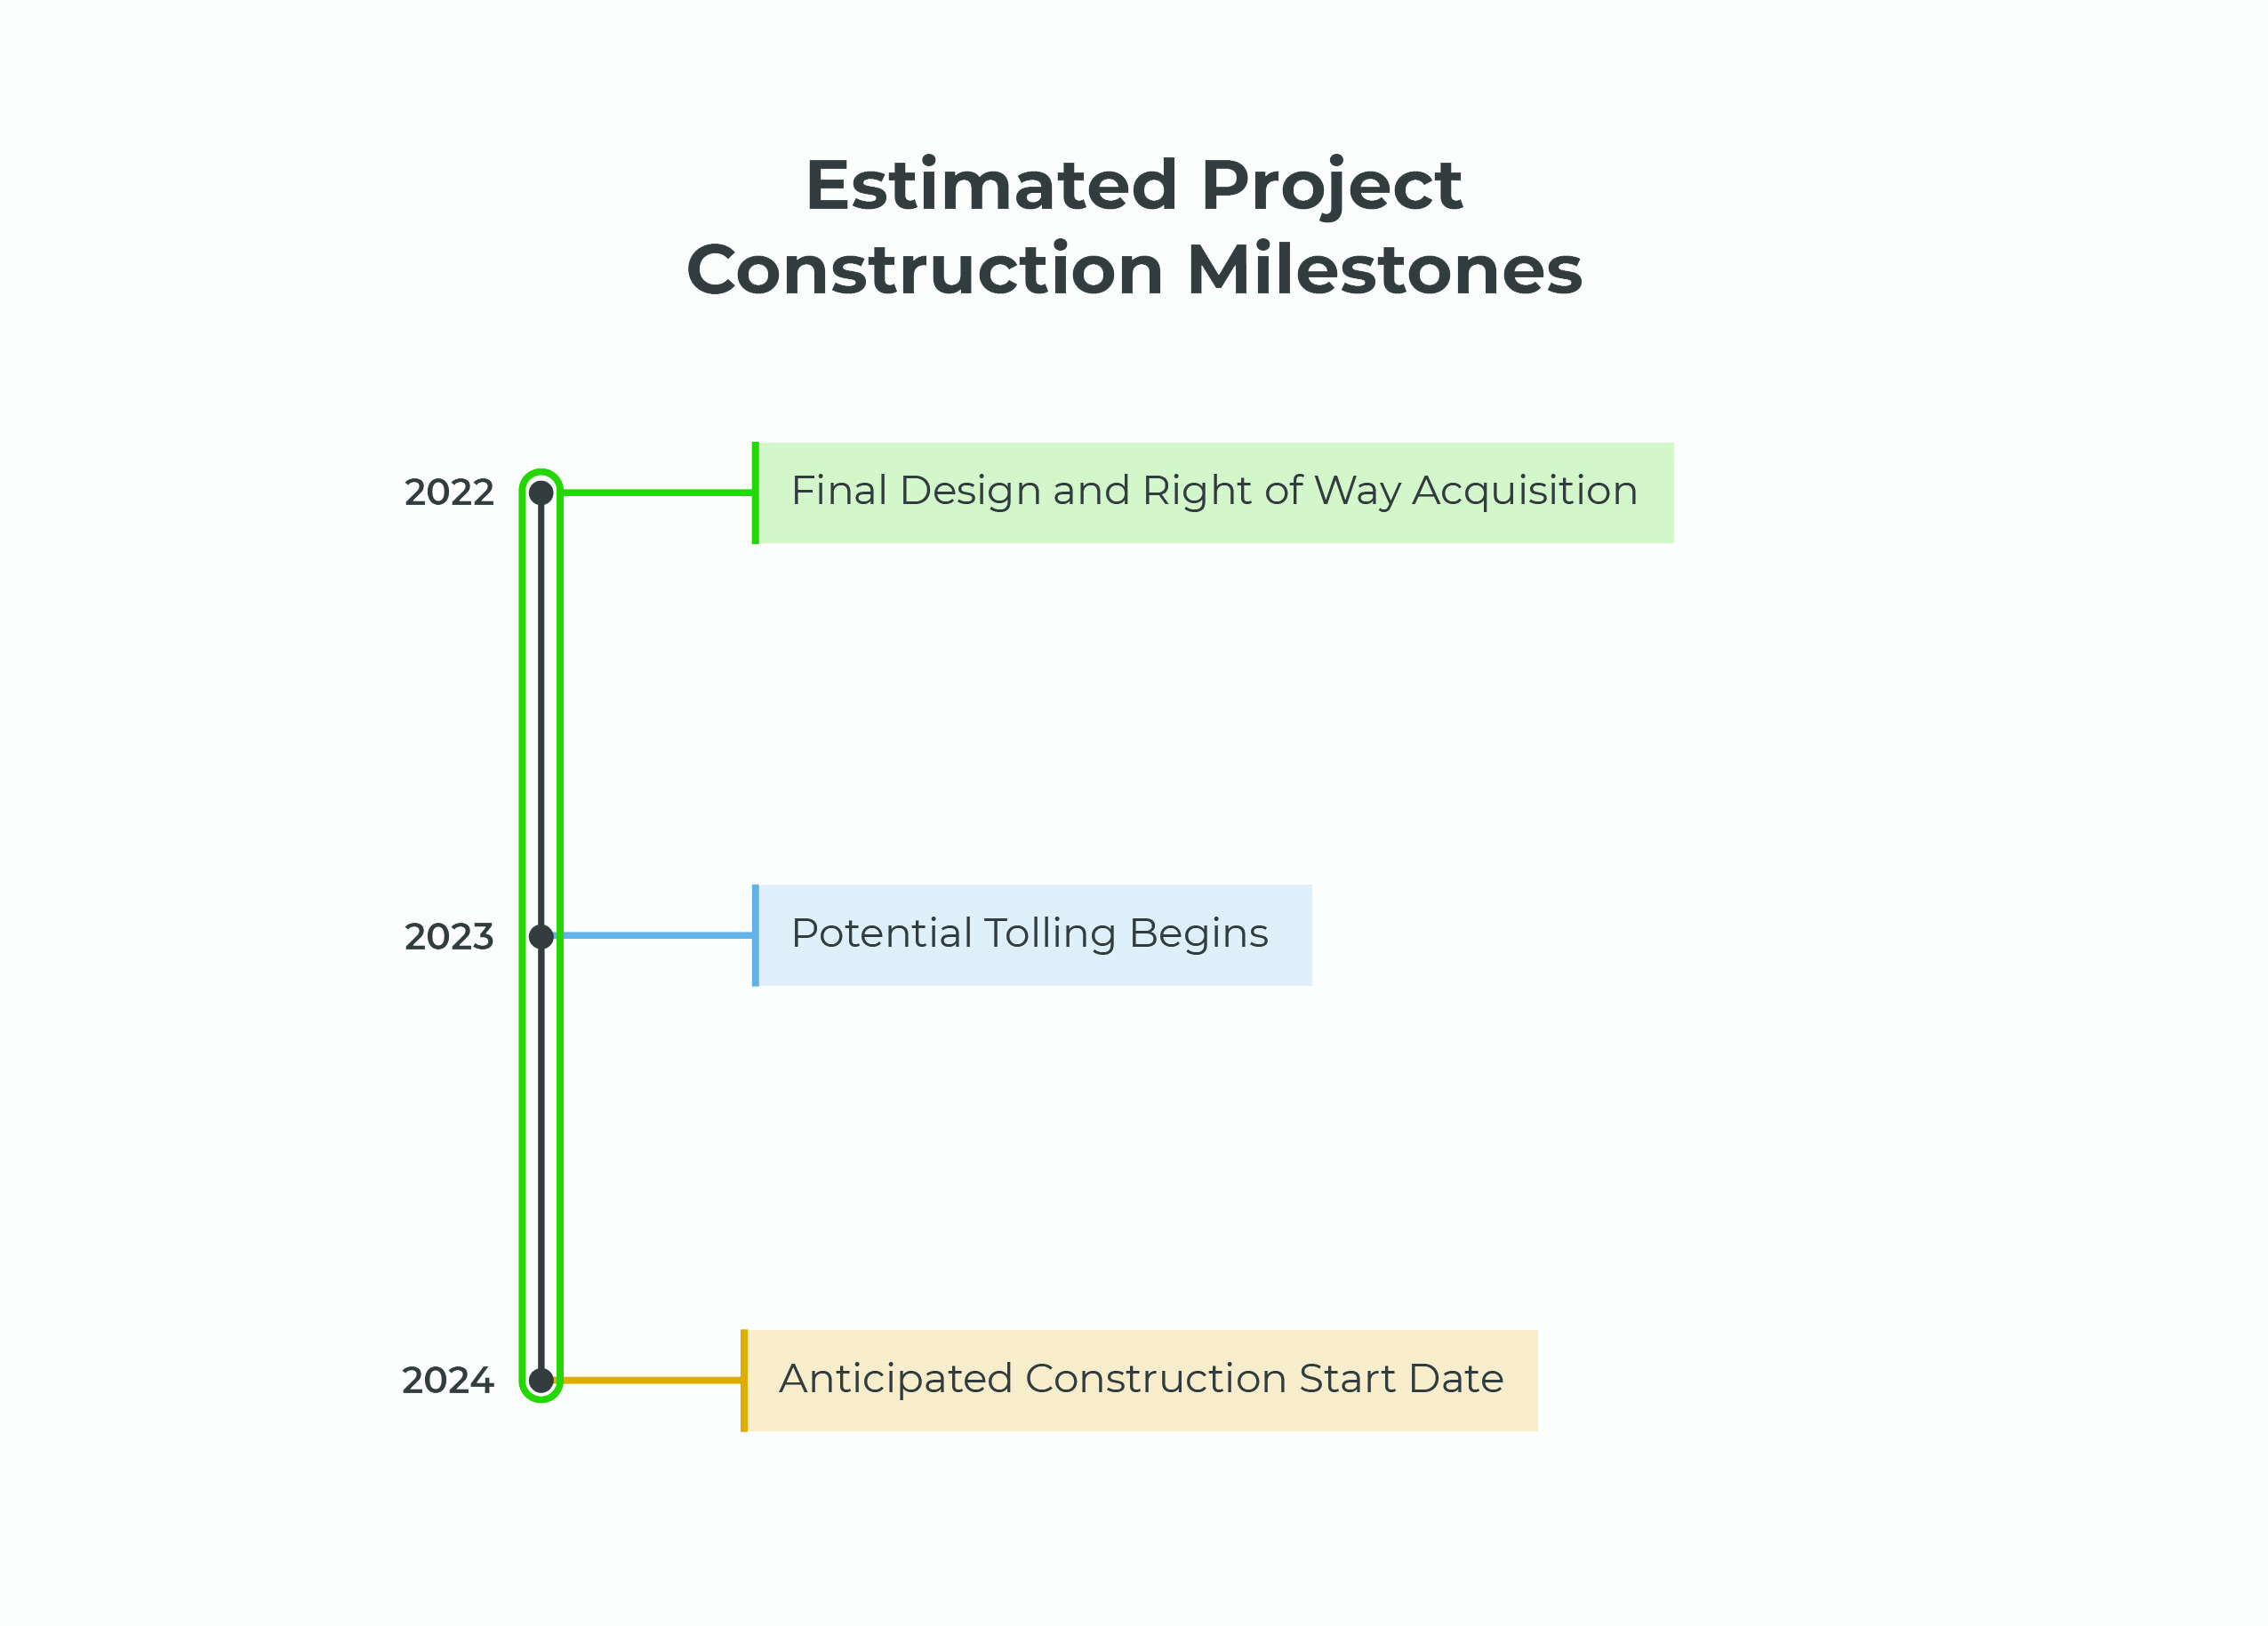 Timeline depicting potential tolling and final design and right of way acquisition beginning in 2023, anticipated construction start date in 2024.